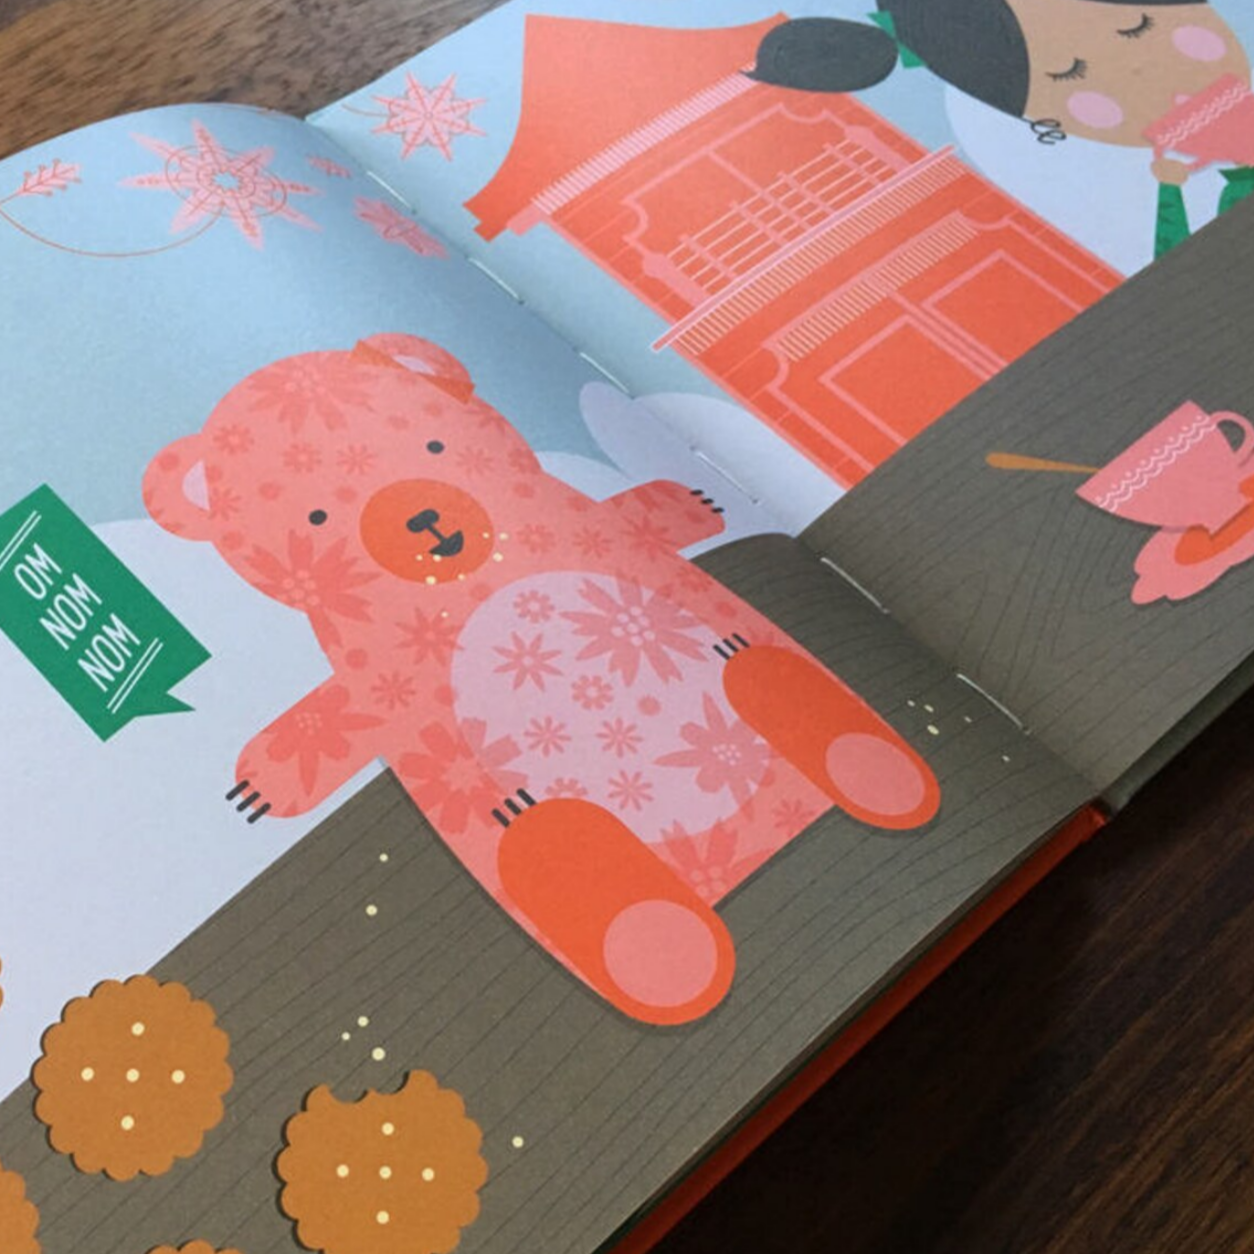 pages of book with teddy bear eating cookies and little girl sipping tea in China town